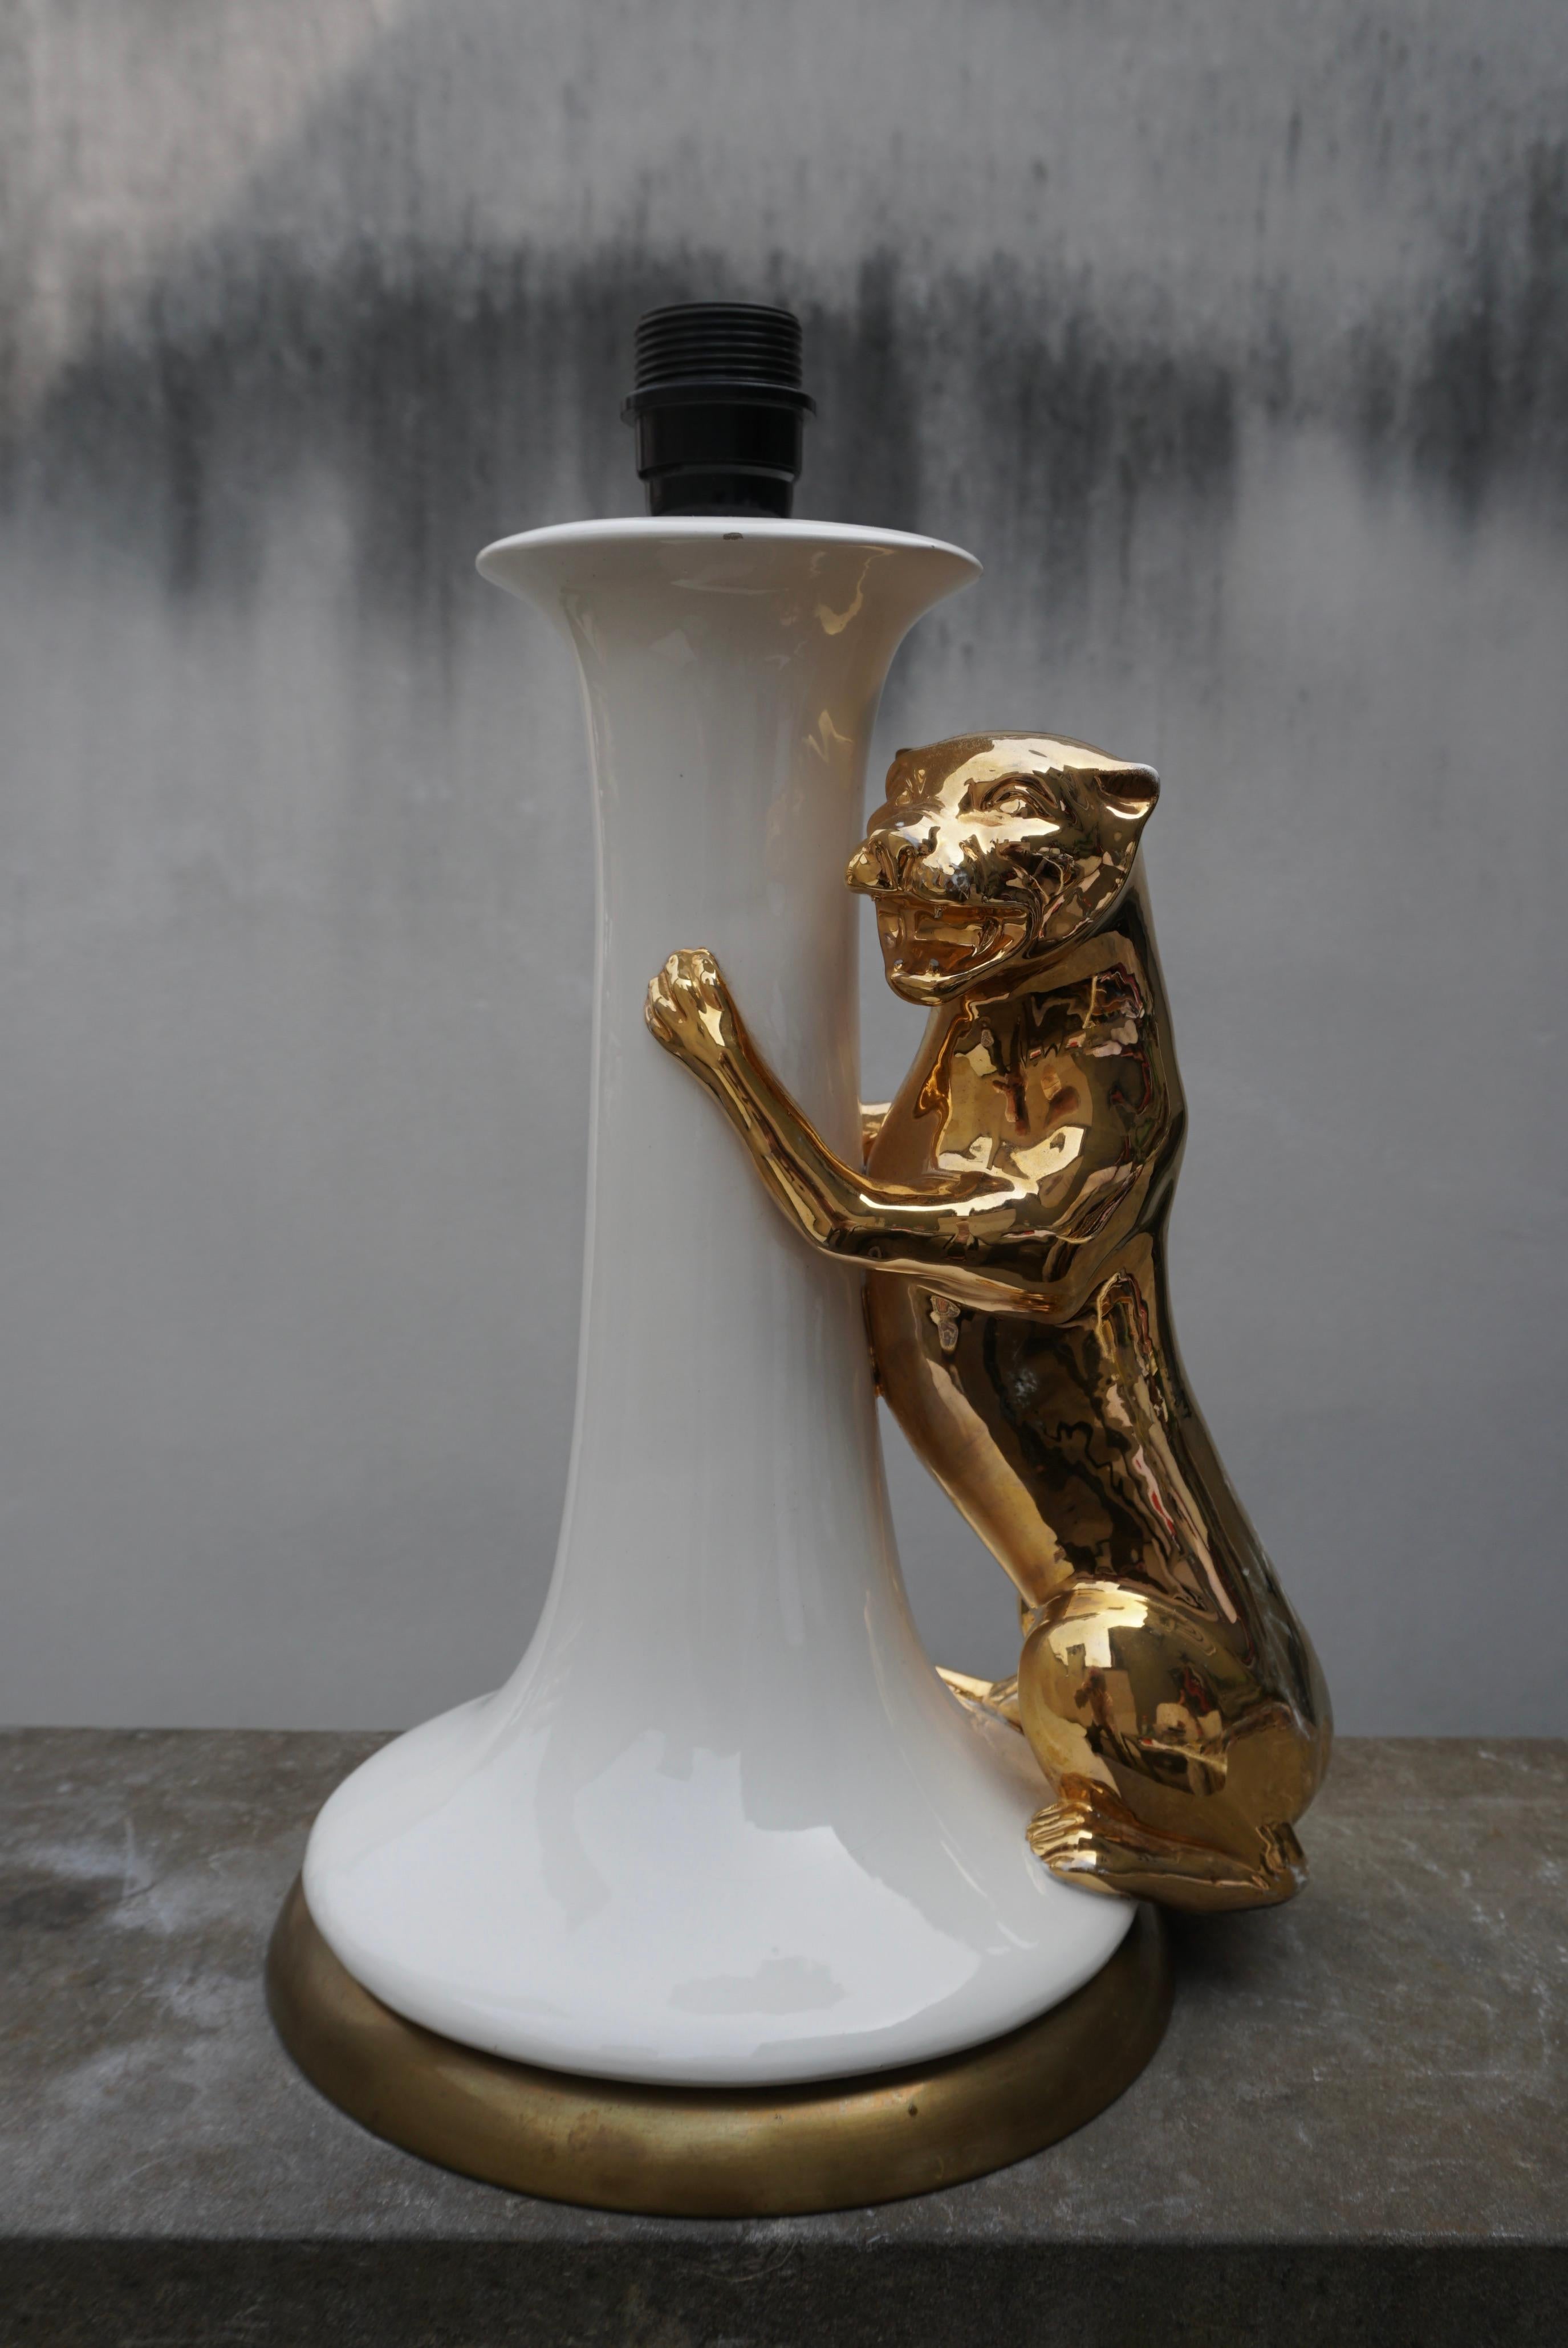 Italian Midcentury Table Lamp with Ceramic Gilt Panther, 1970s For Sale 5